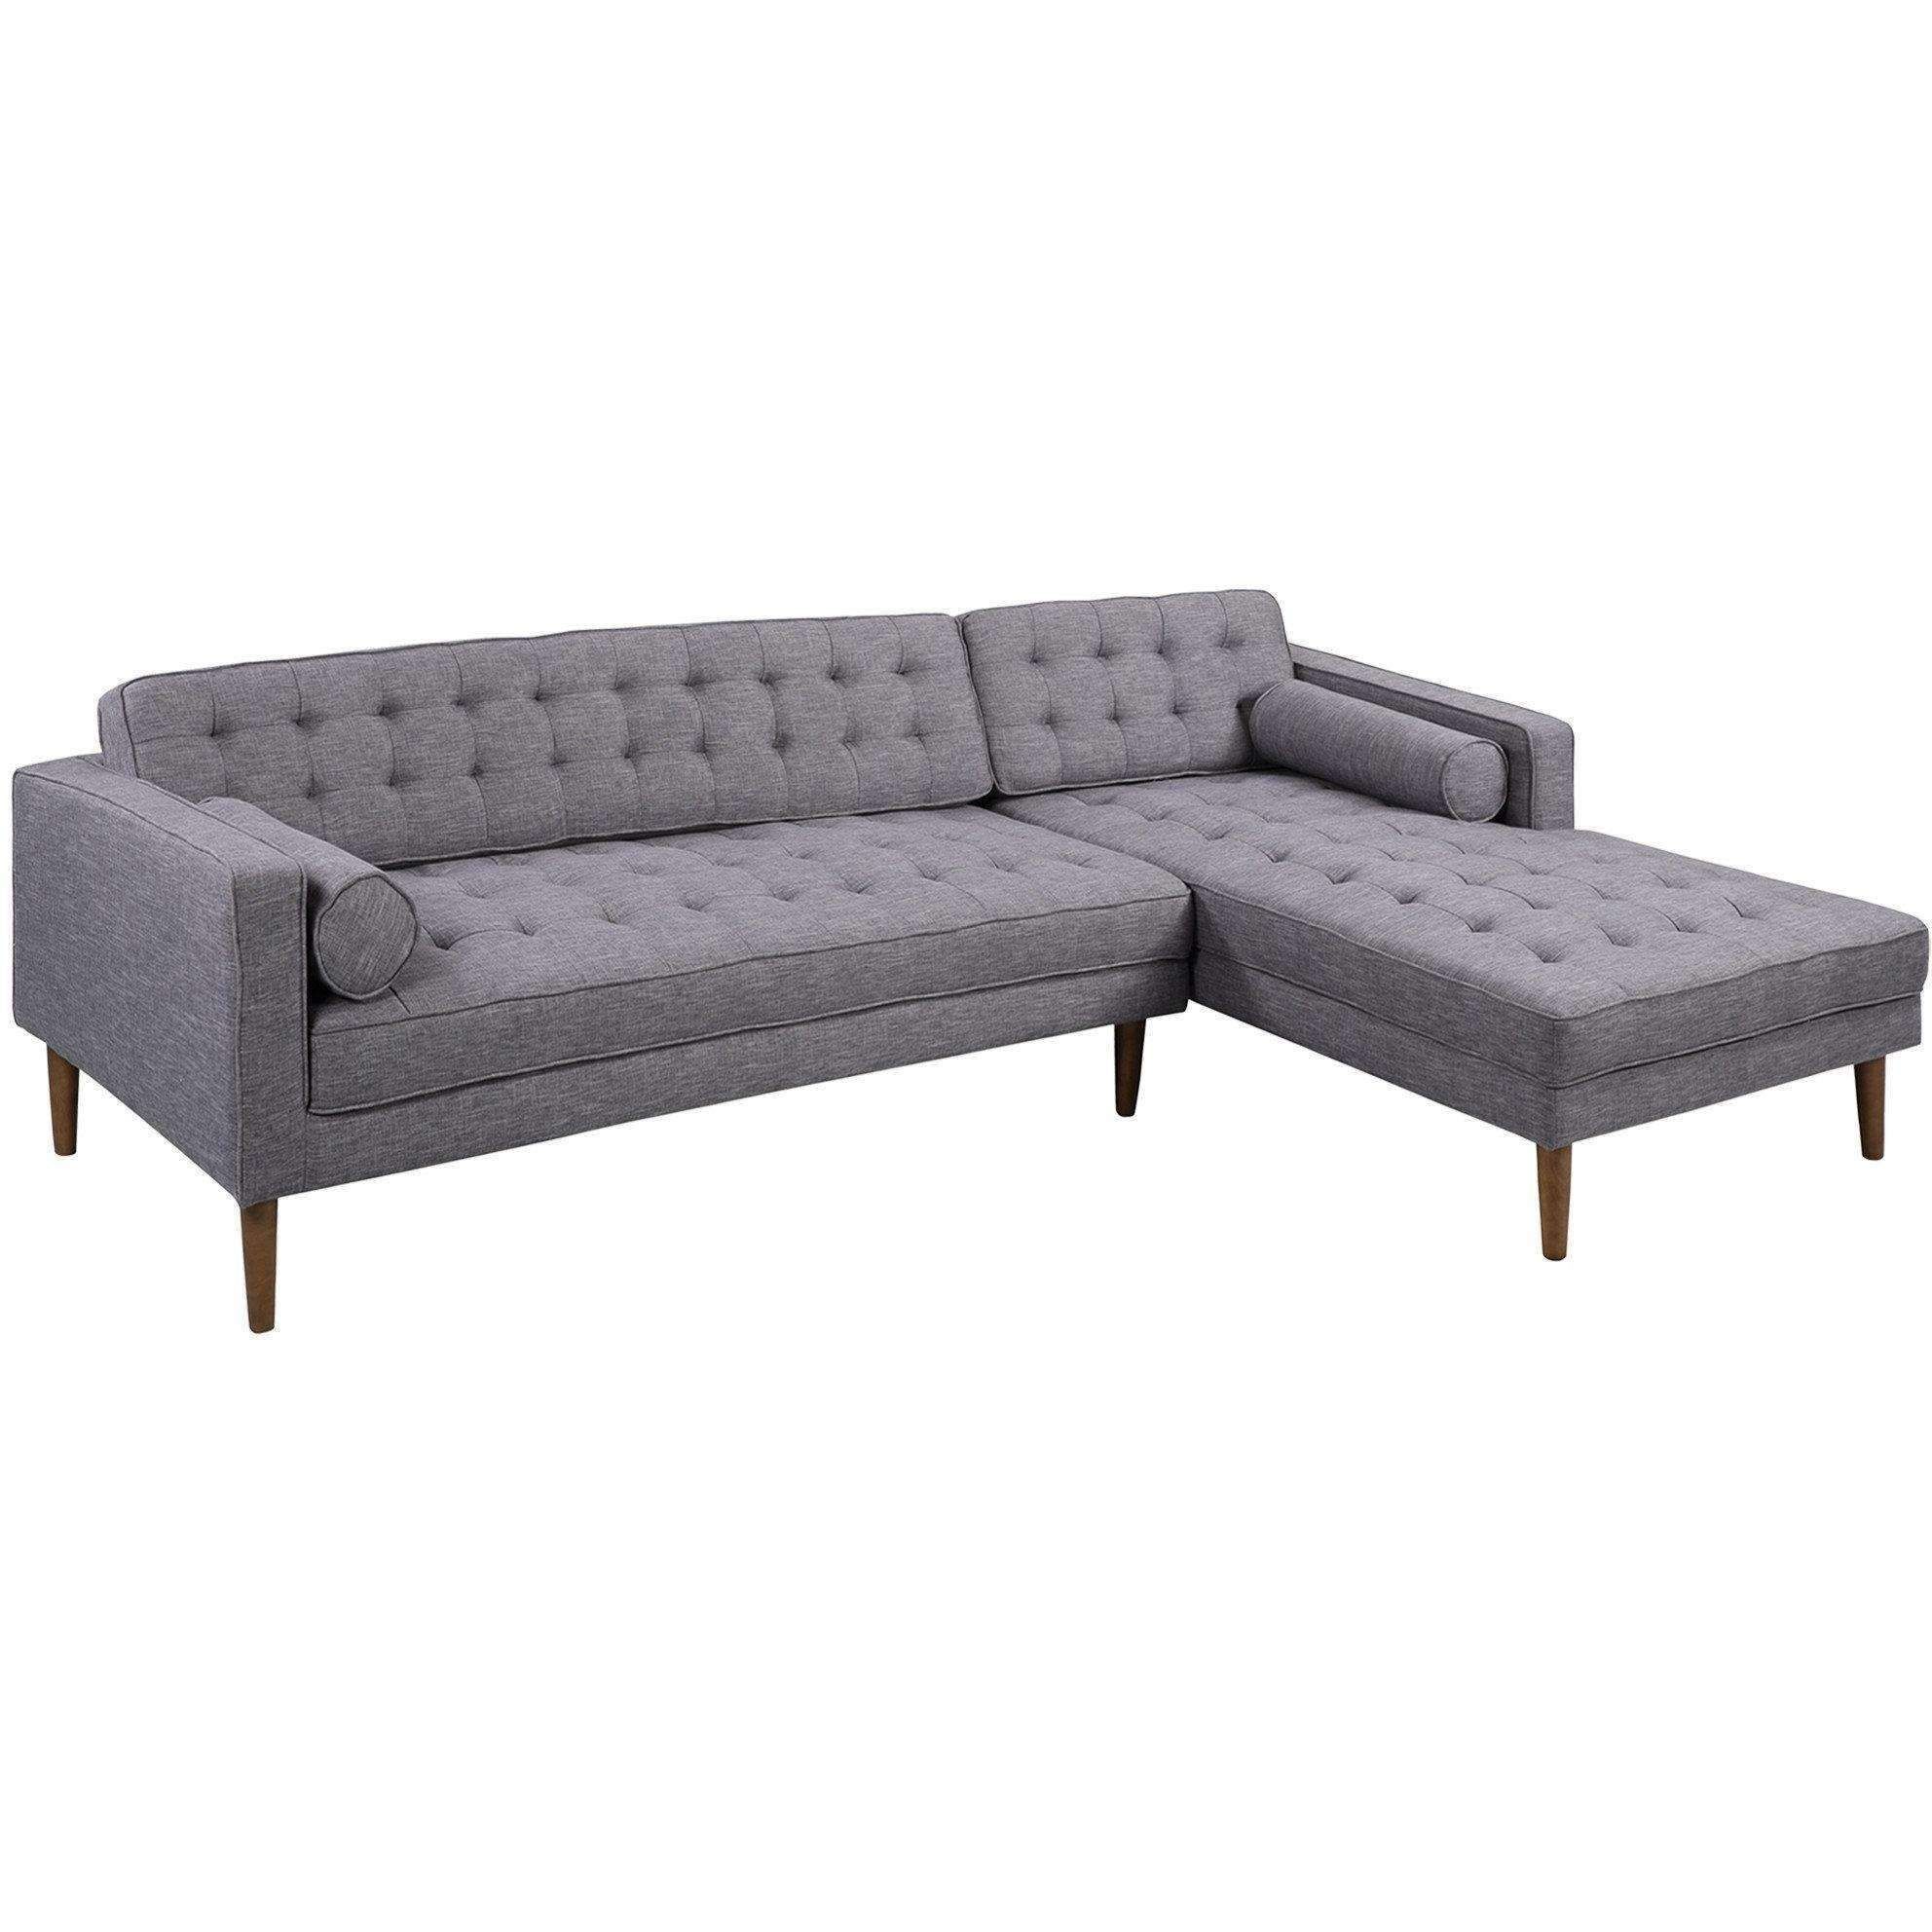 Armen Living Element Right Side Chaise Sectional In Dark Inside Element Right Side Chaise Sectional Sofas In Dark Gray Linen And Walnut Legs (View 1 of 15)